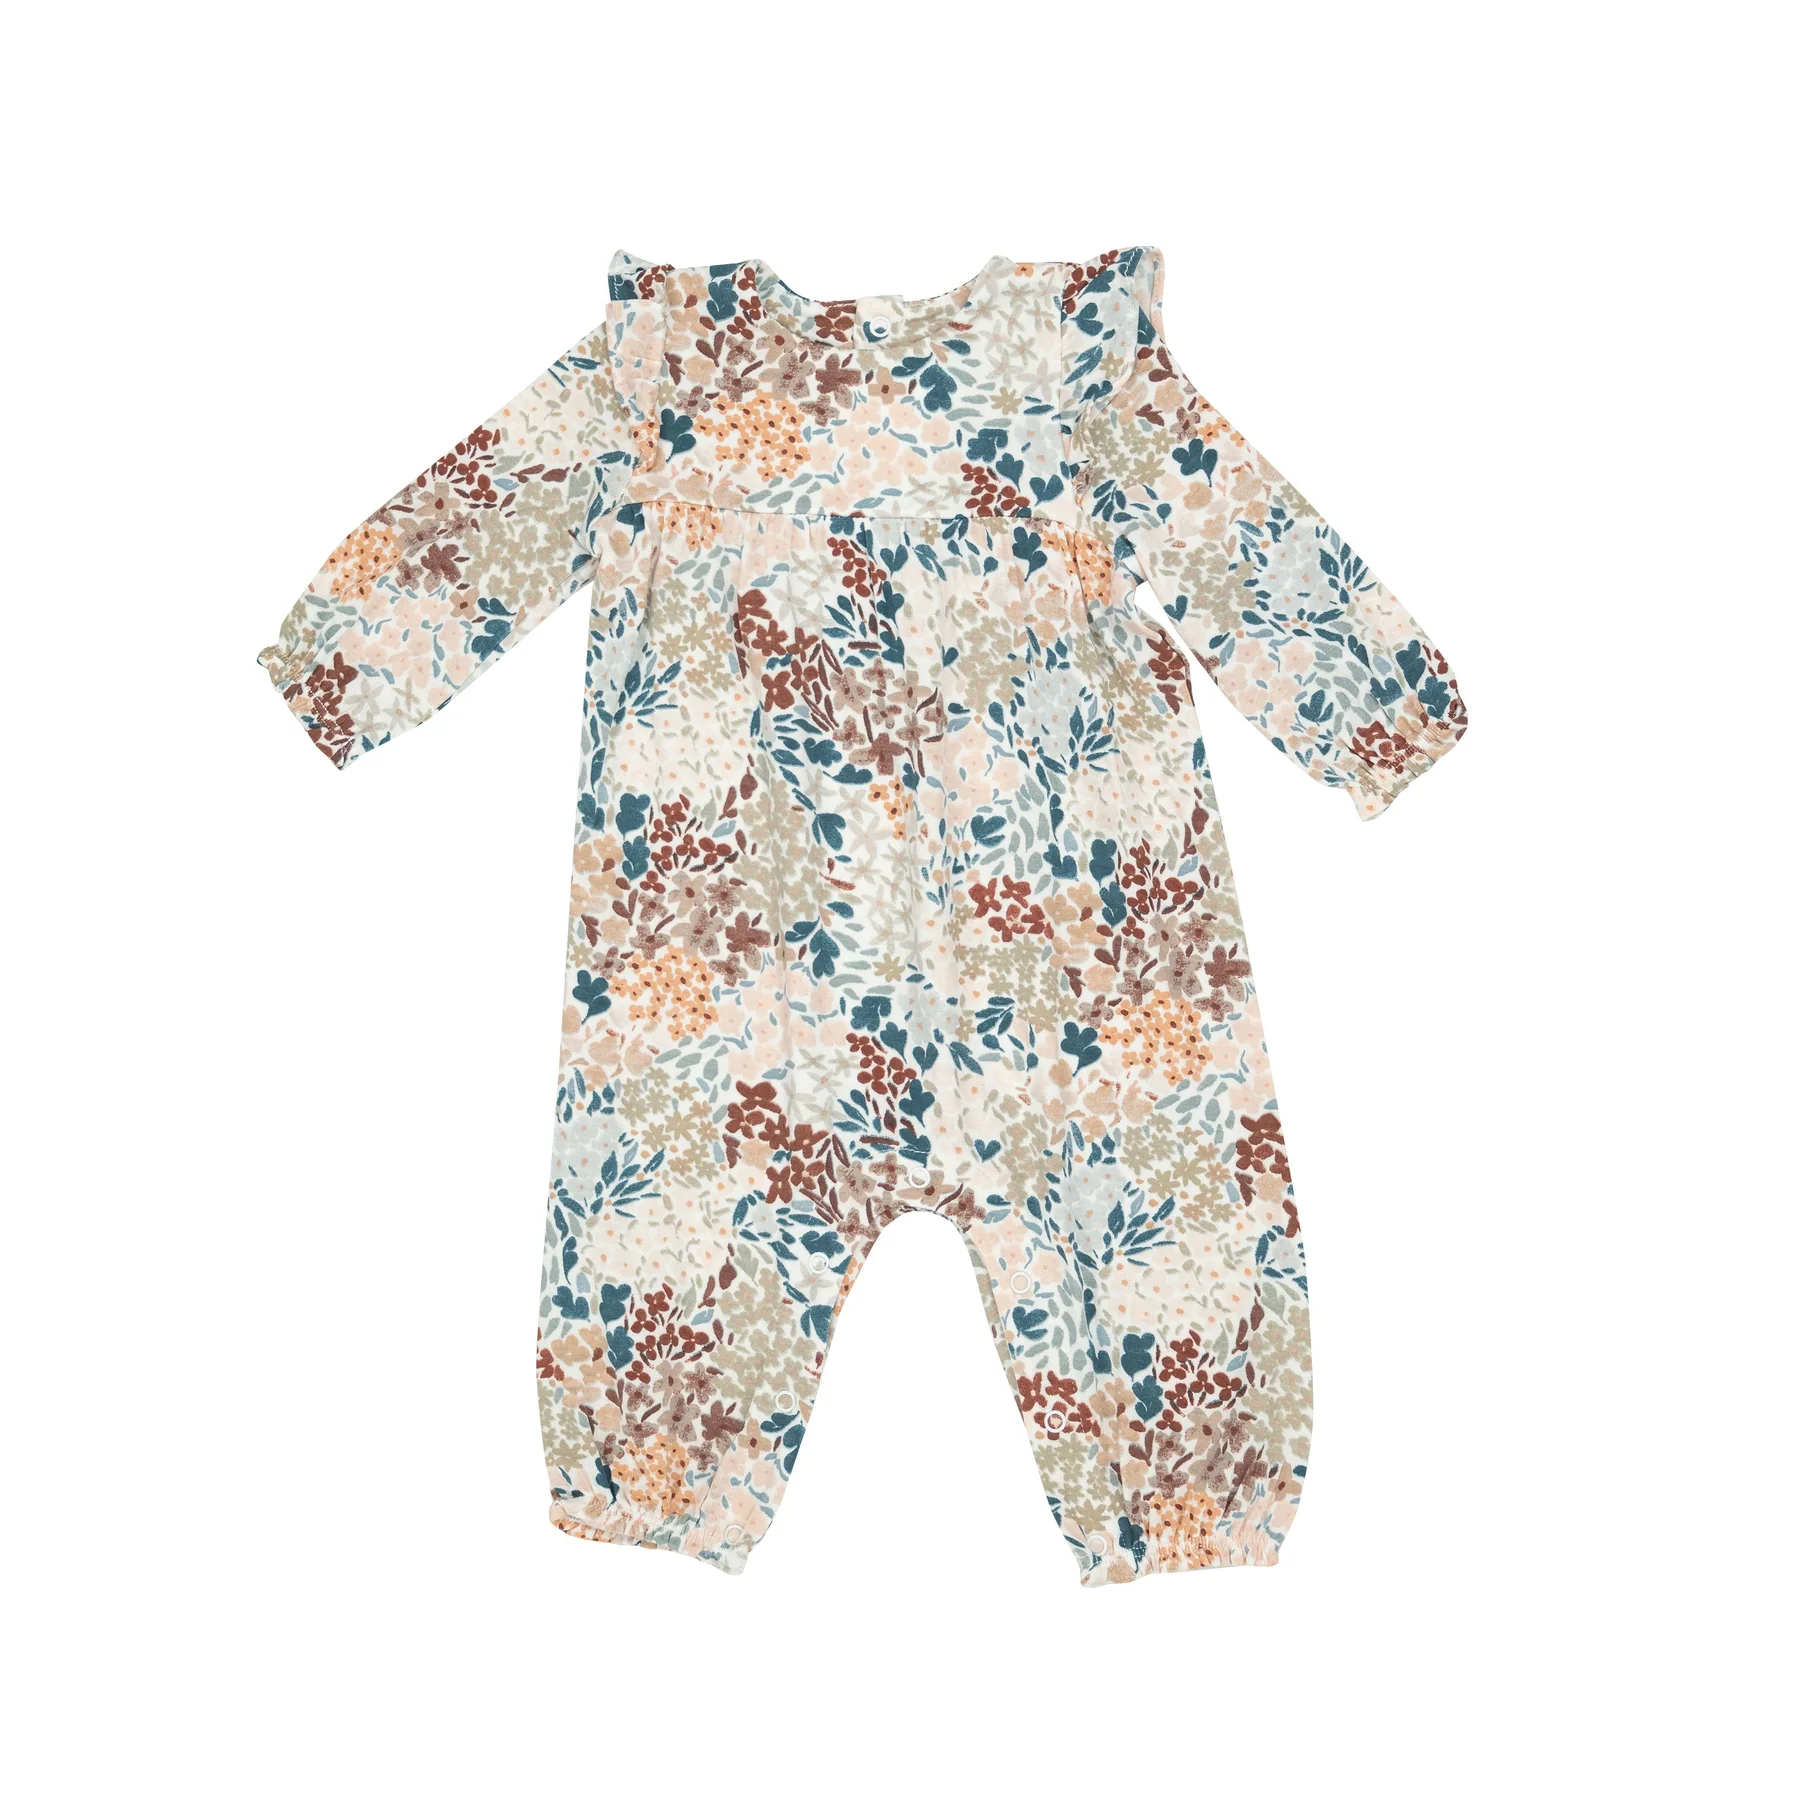 RUFFLE SLEEVER ROMPER - PAINTED FALL FLORAL